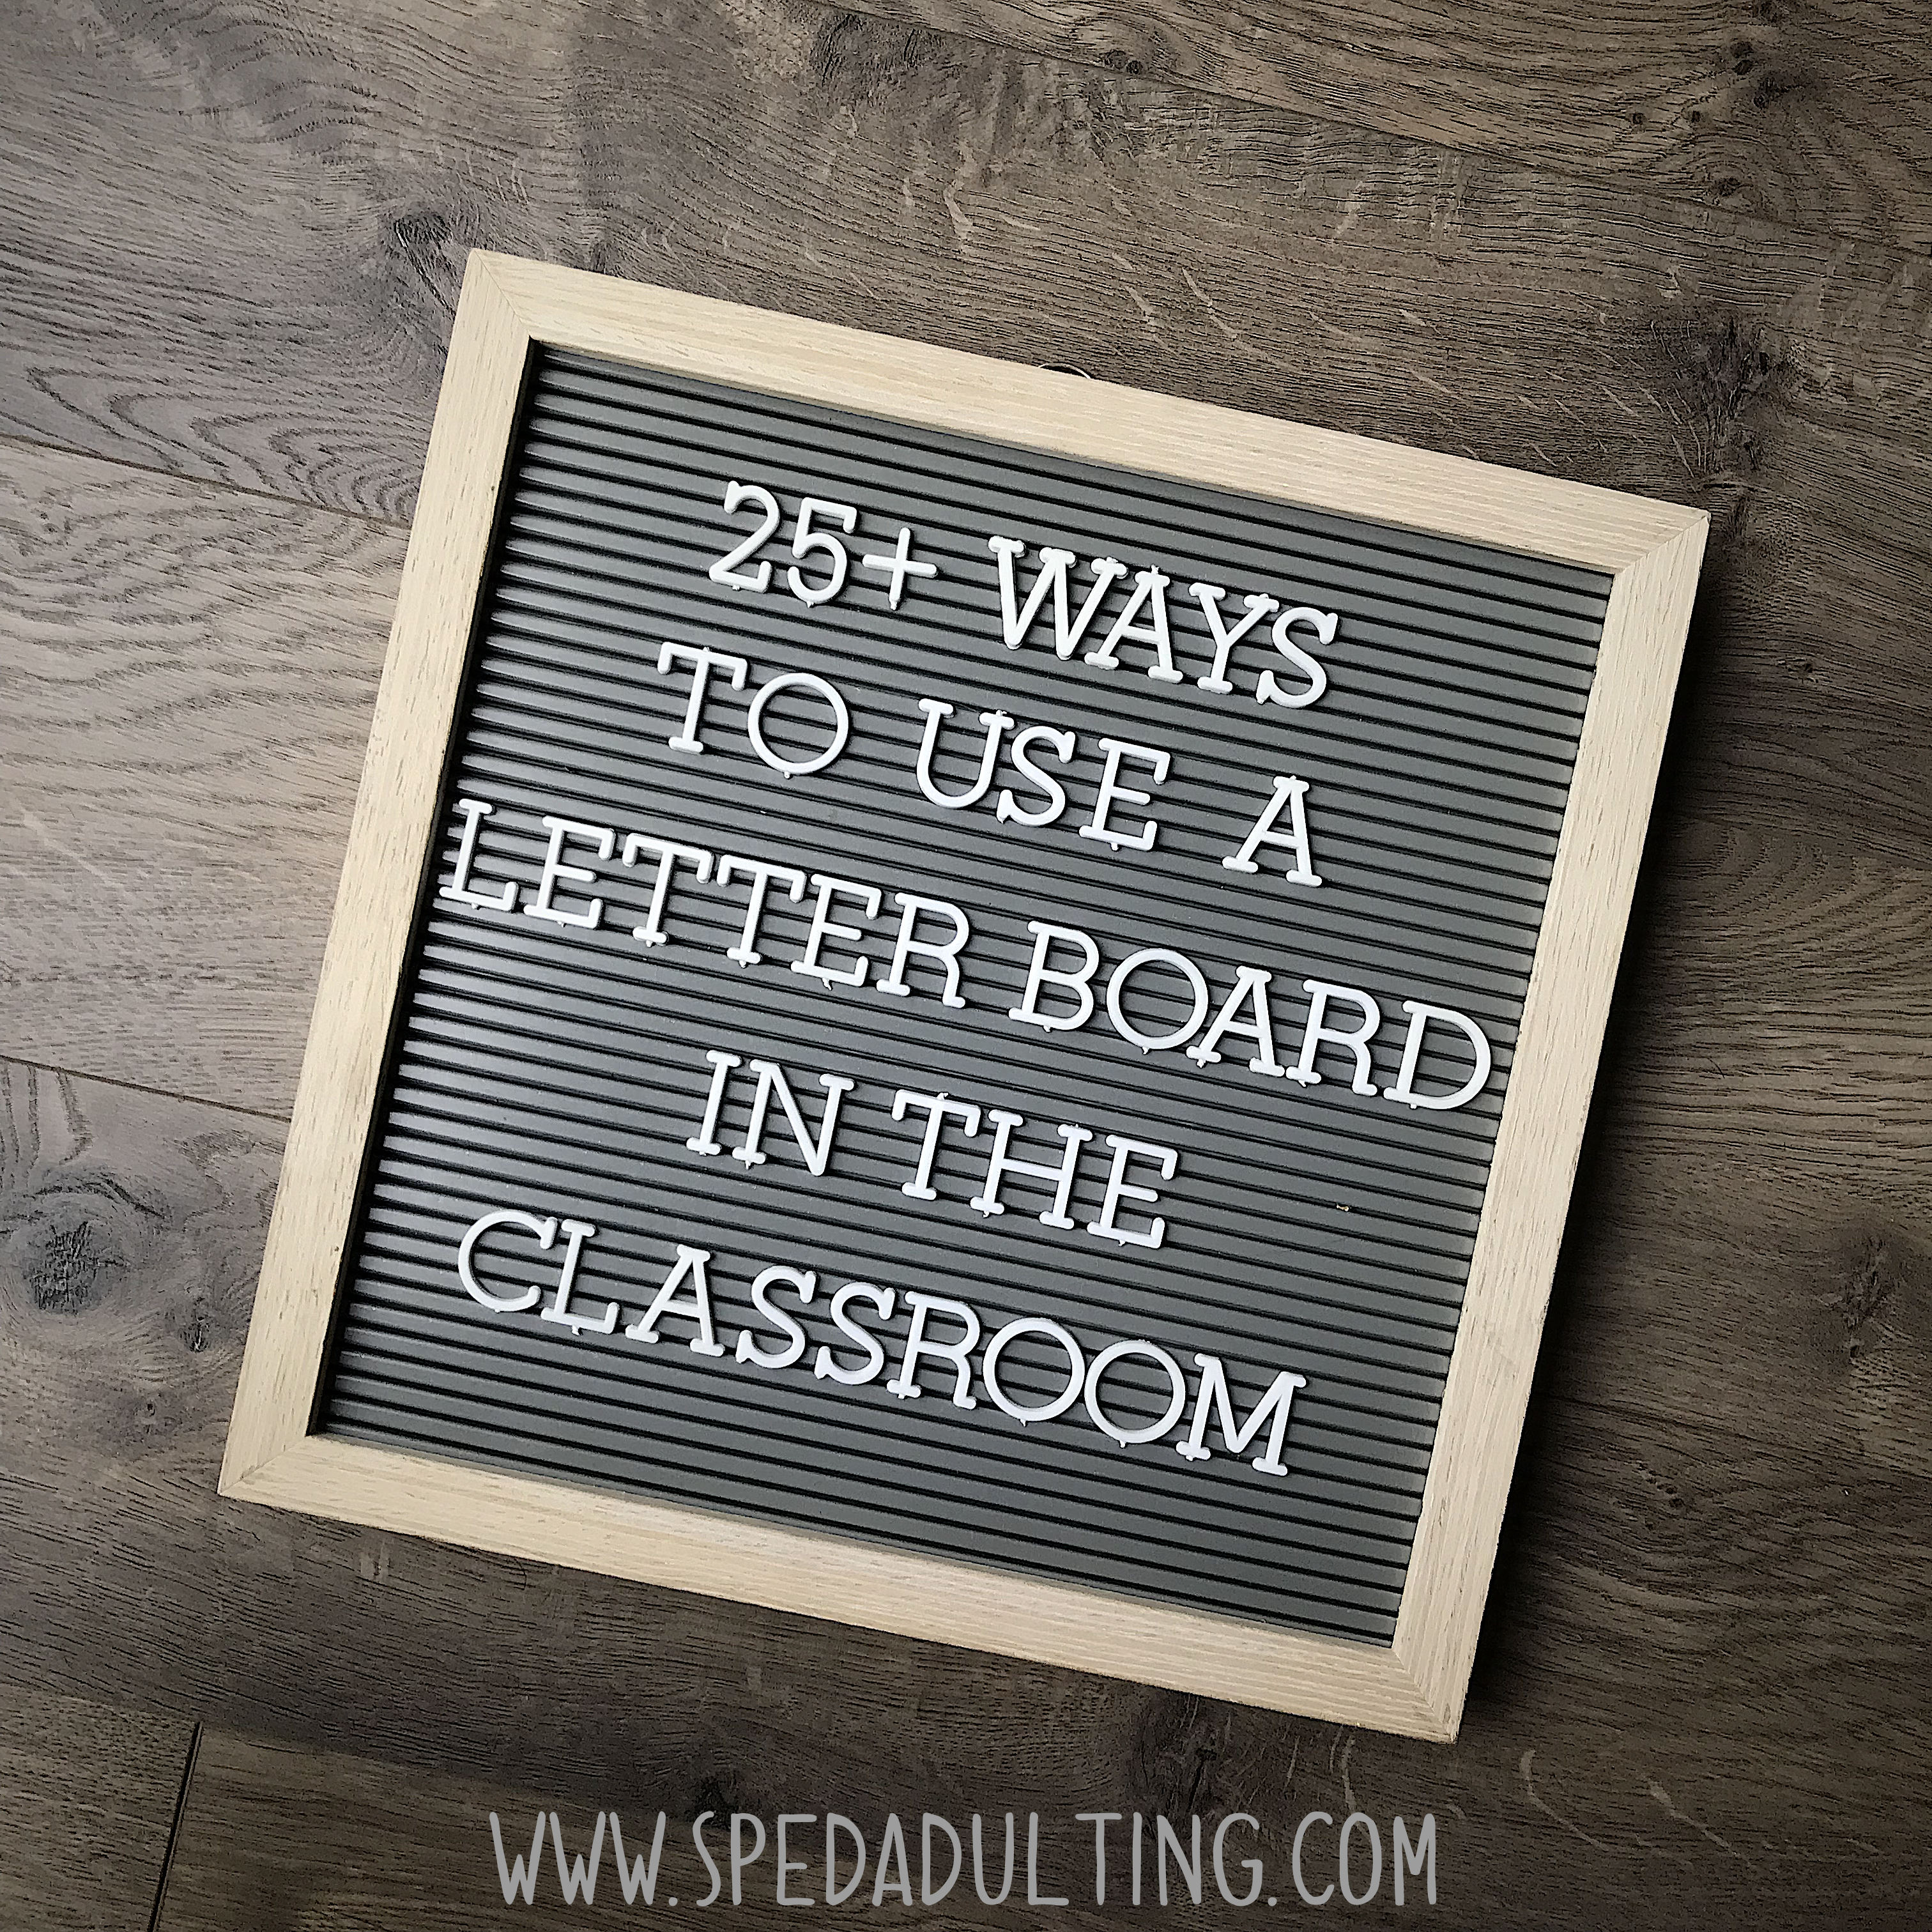 25 + ways to use a letter board in the classroom - behavior, organization, centers, calendar, reminders, visual